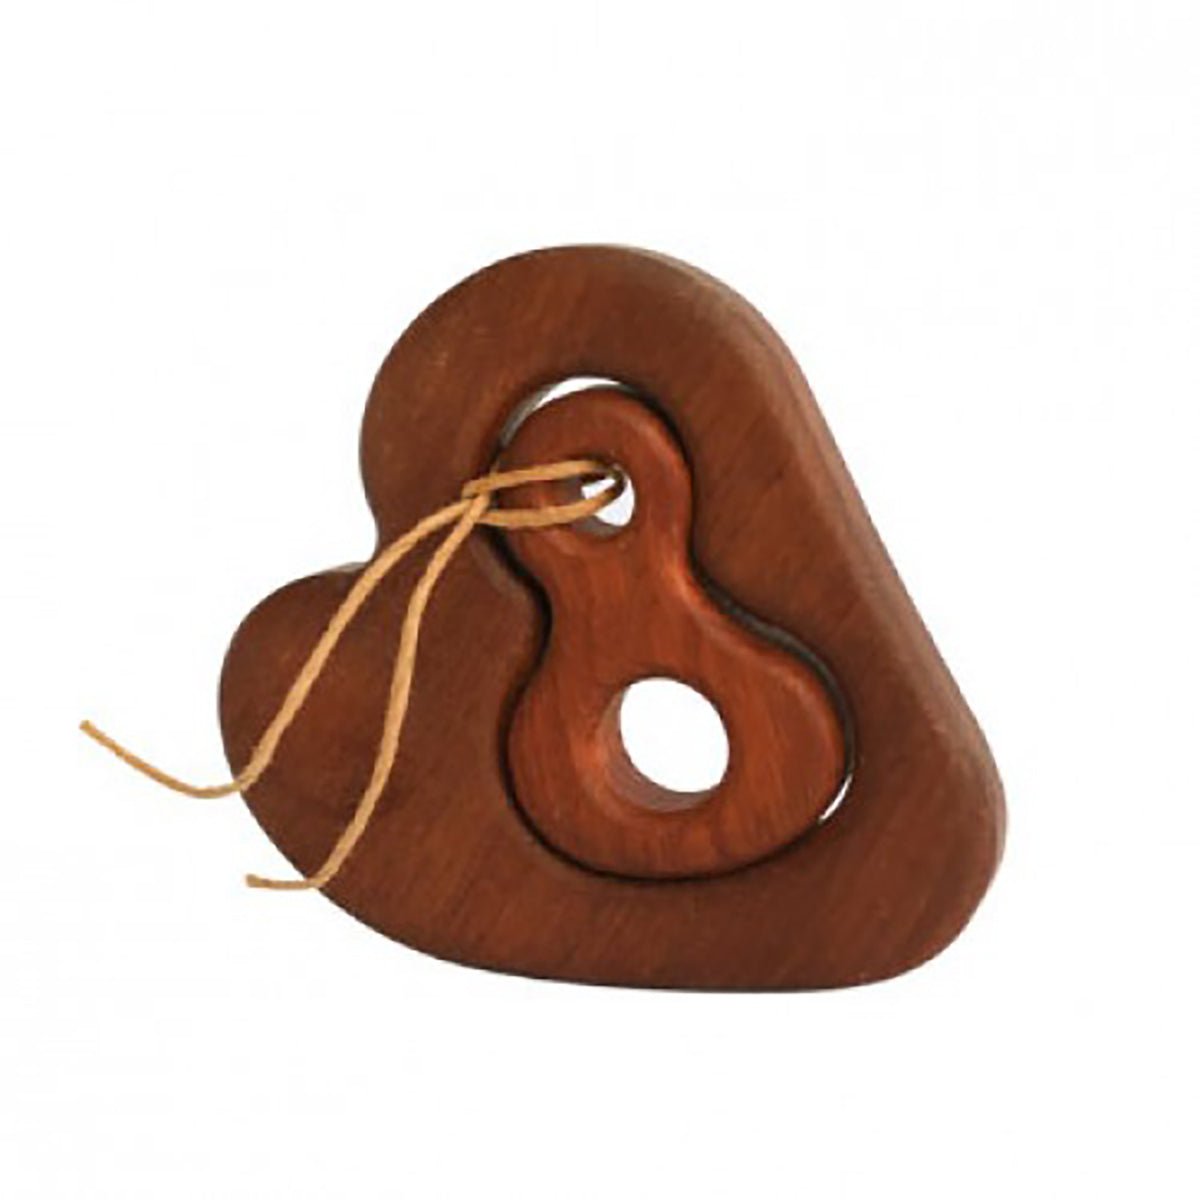 In-wood Separation Heart | in-wood